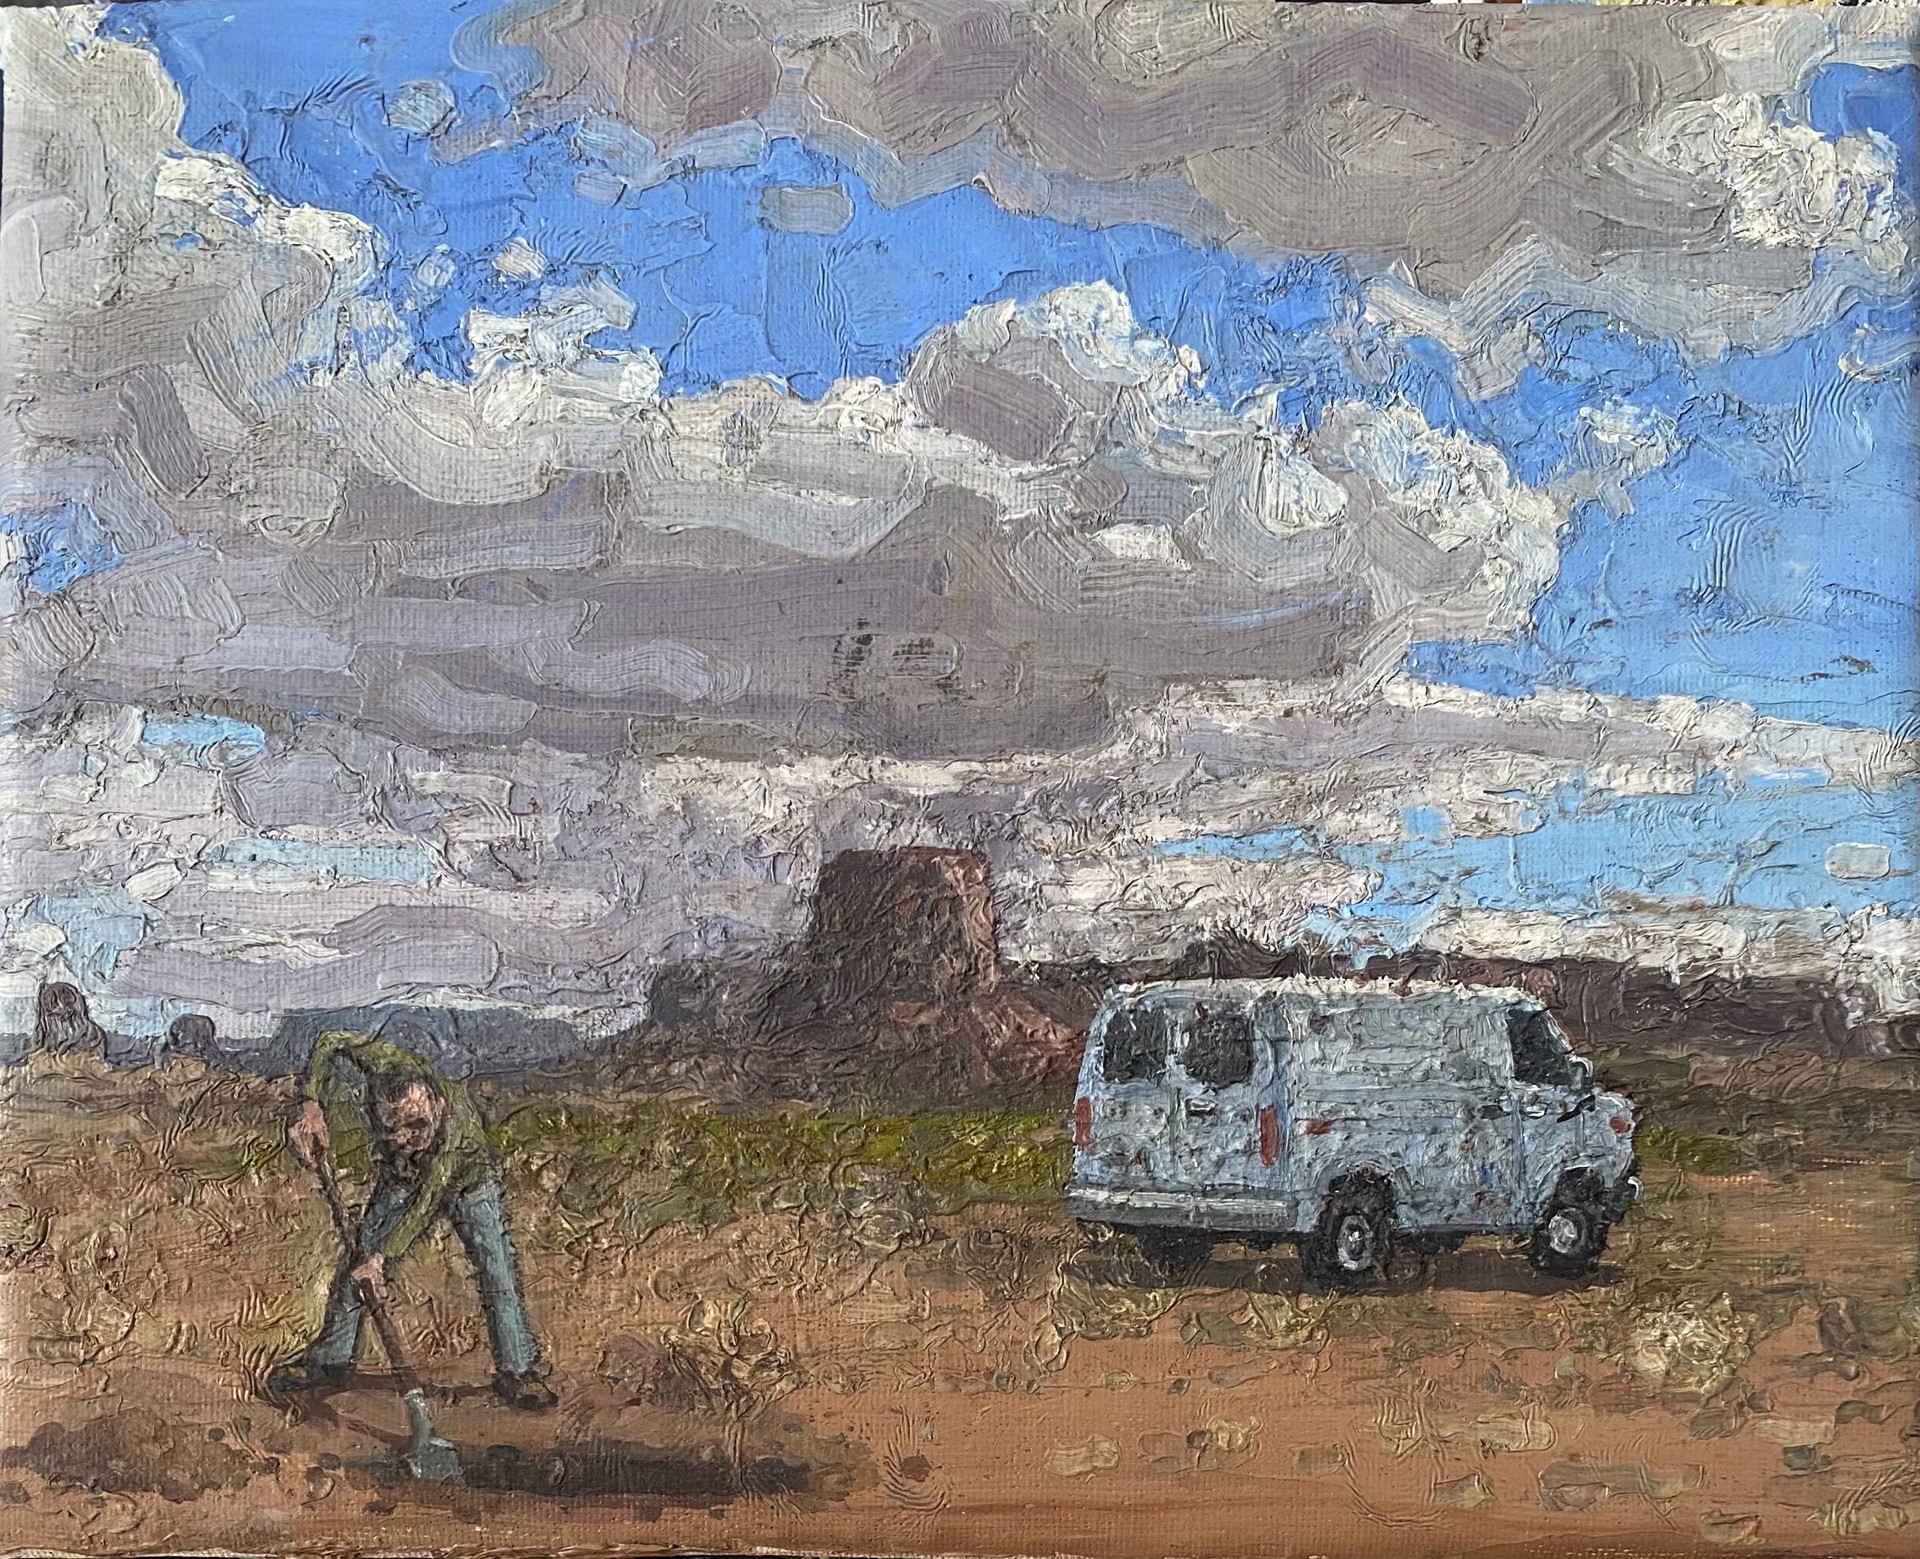 Landscape with Ford Econoline by Colin Chillag